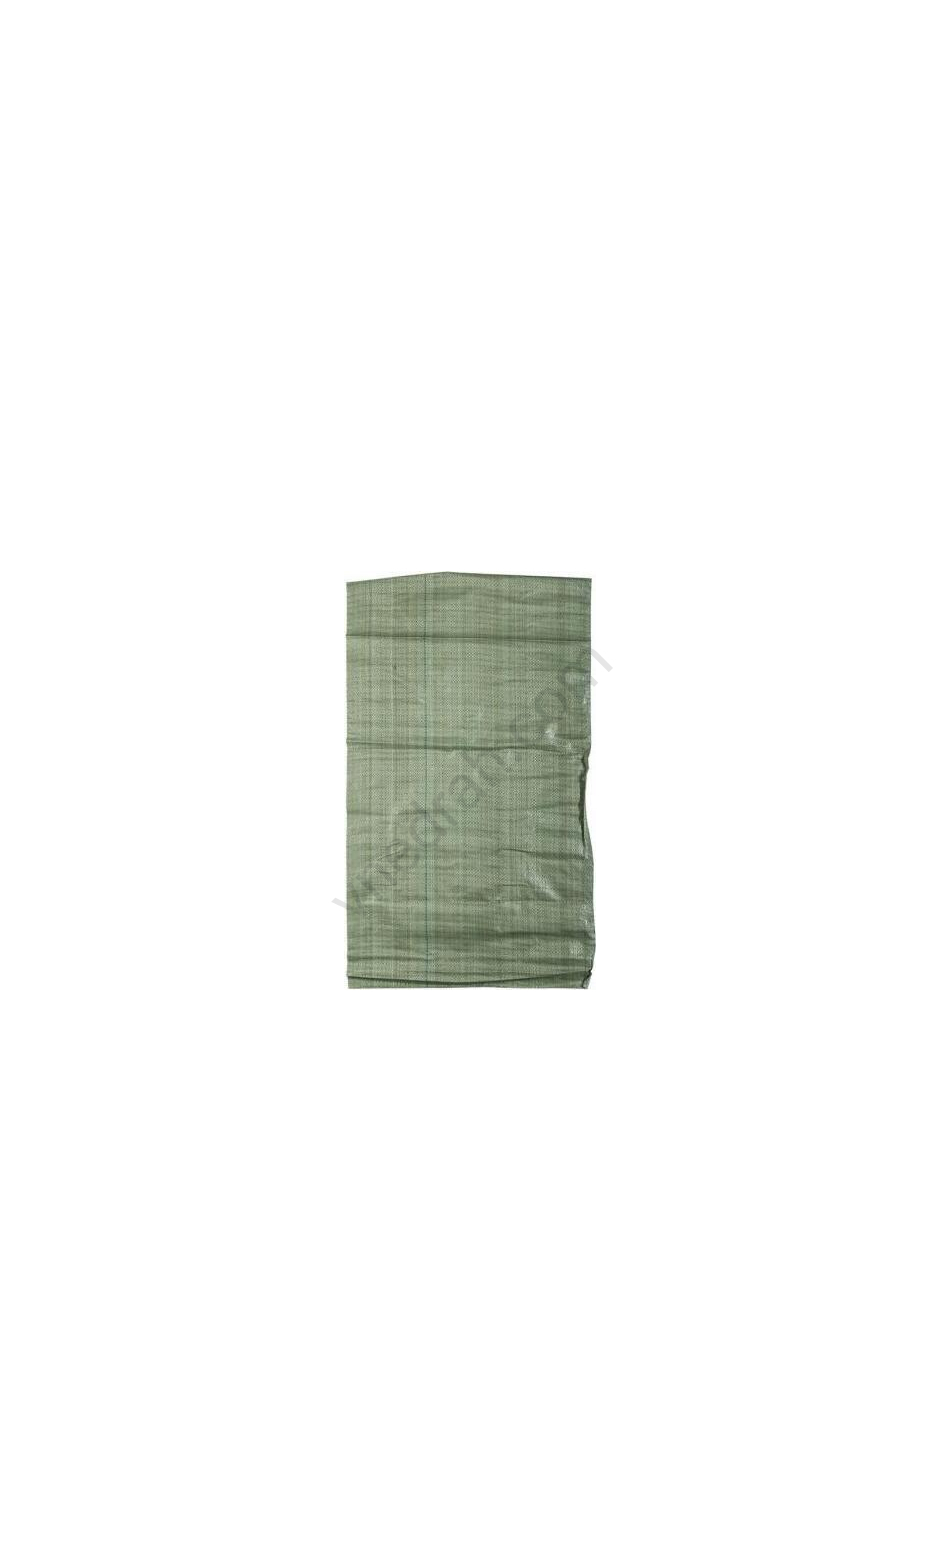 Green construction bag 55x95cm - image 11 | Product